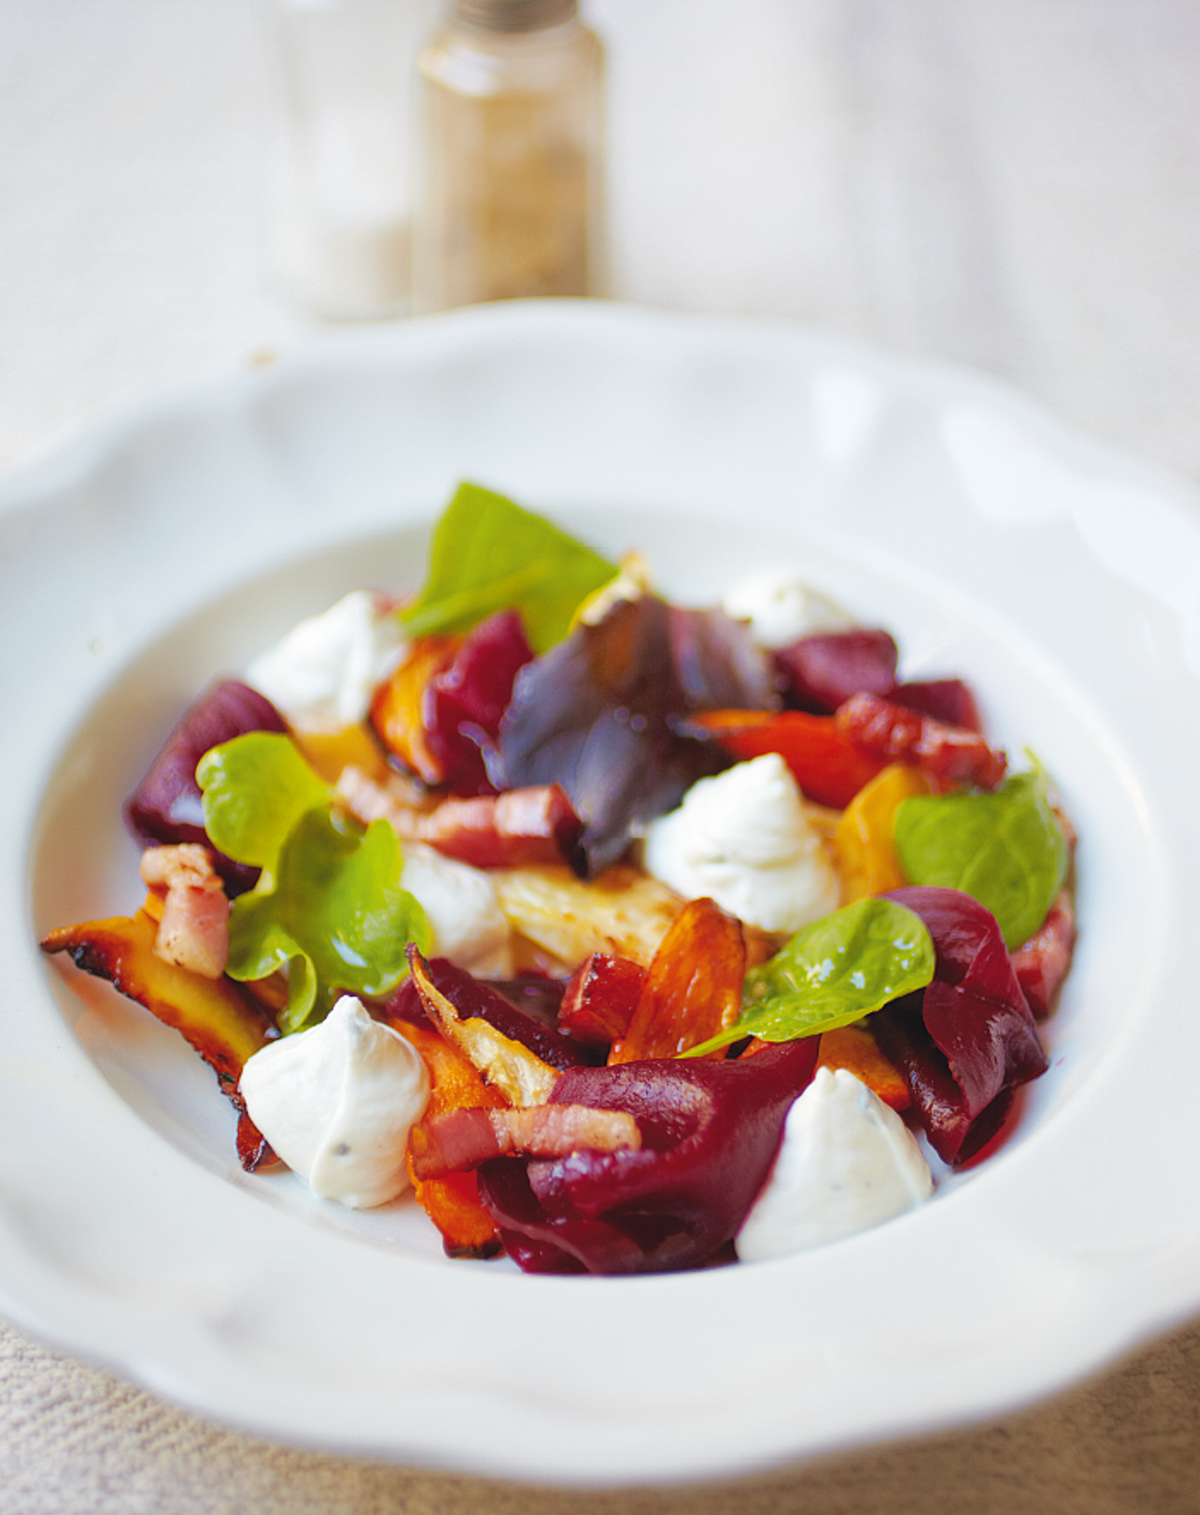 Winter Salad with a Goat’s Cheese Mousse